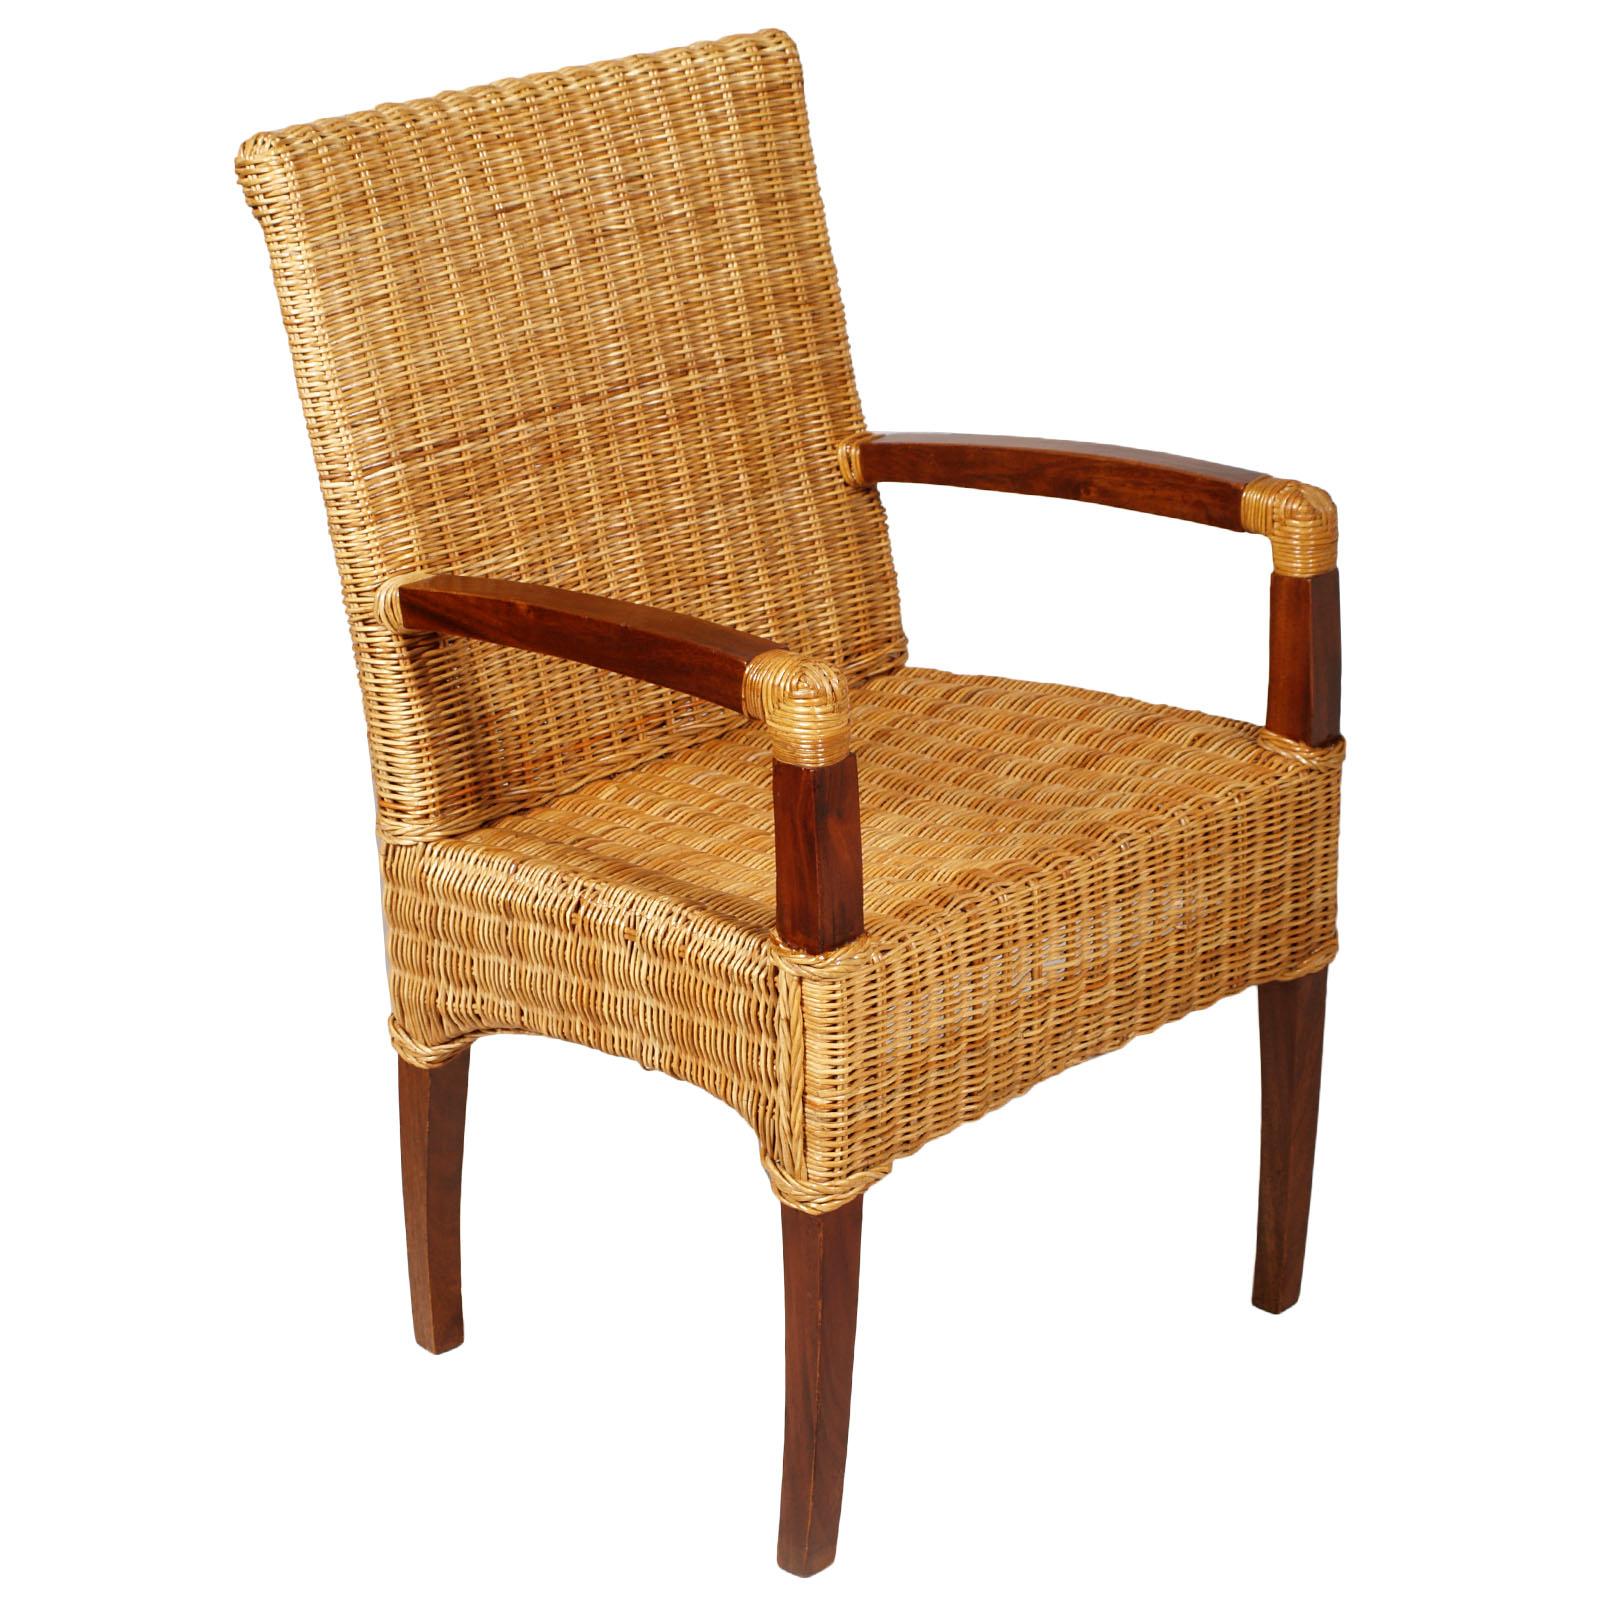 1930s Pair of fine French Art Deco chairs with armrest in the style of Jules Leleu in walnut and rattan, restored. Good conditions
Measures cm: H 46/93, W 55, D 55.